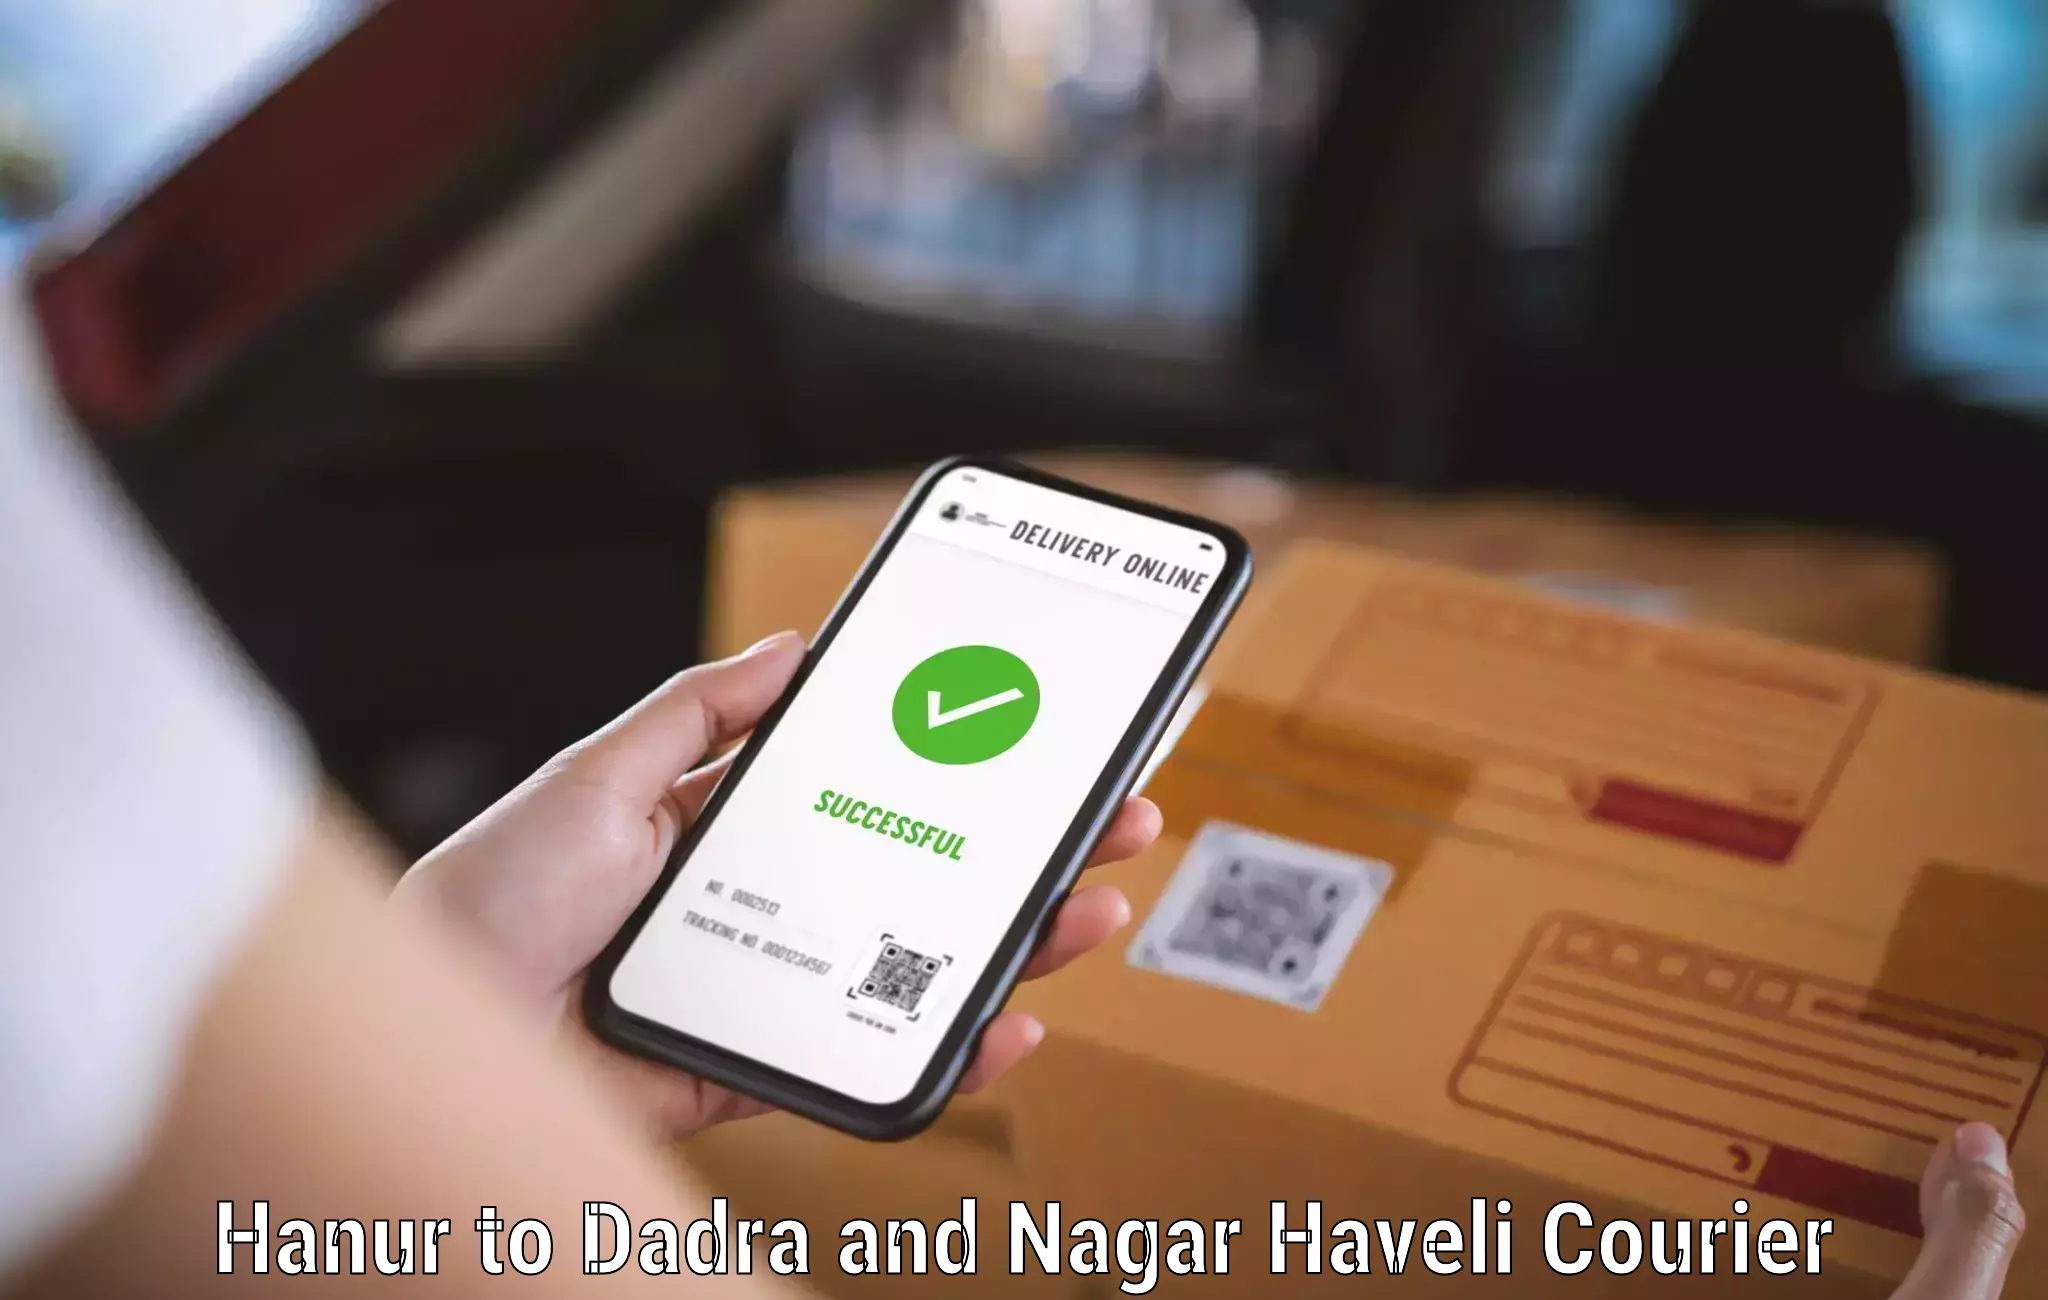 Easy access courier services Hanur to Dadra and Nagar Haveli